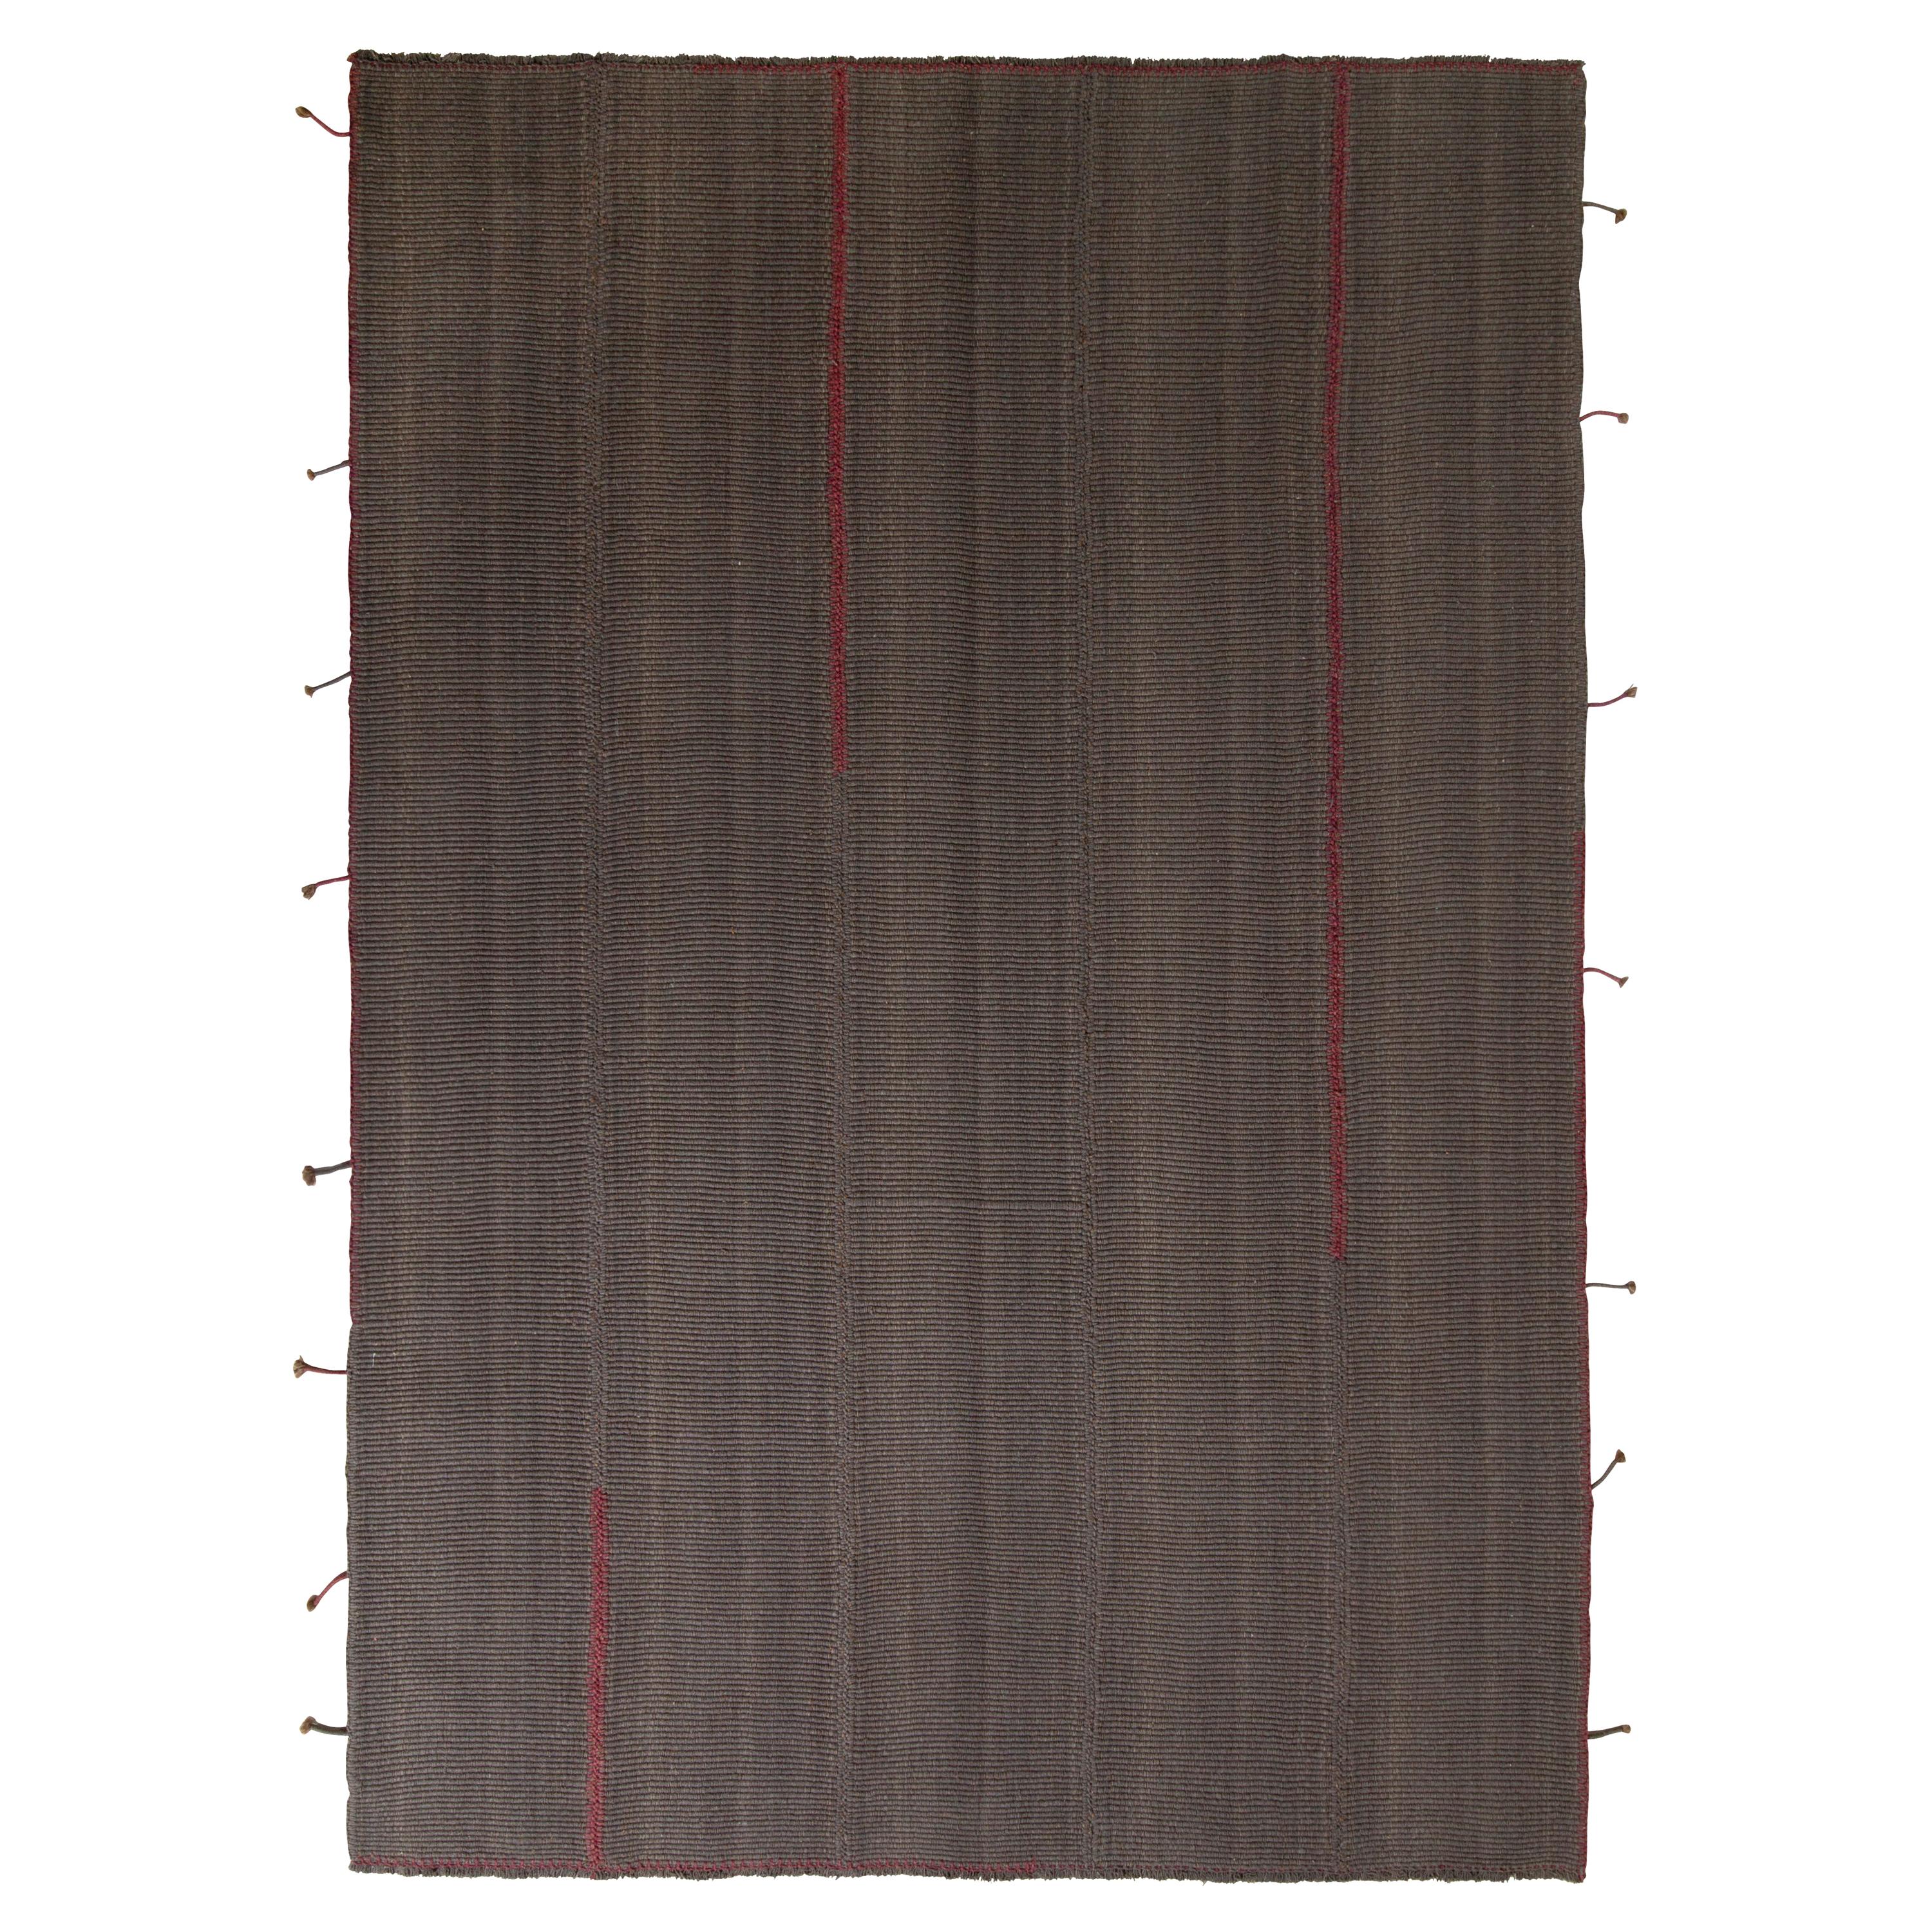 Rug & Kilim’s Modern Kilim Rug in Red and Gray-Brown Striped Patterns